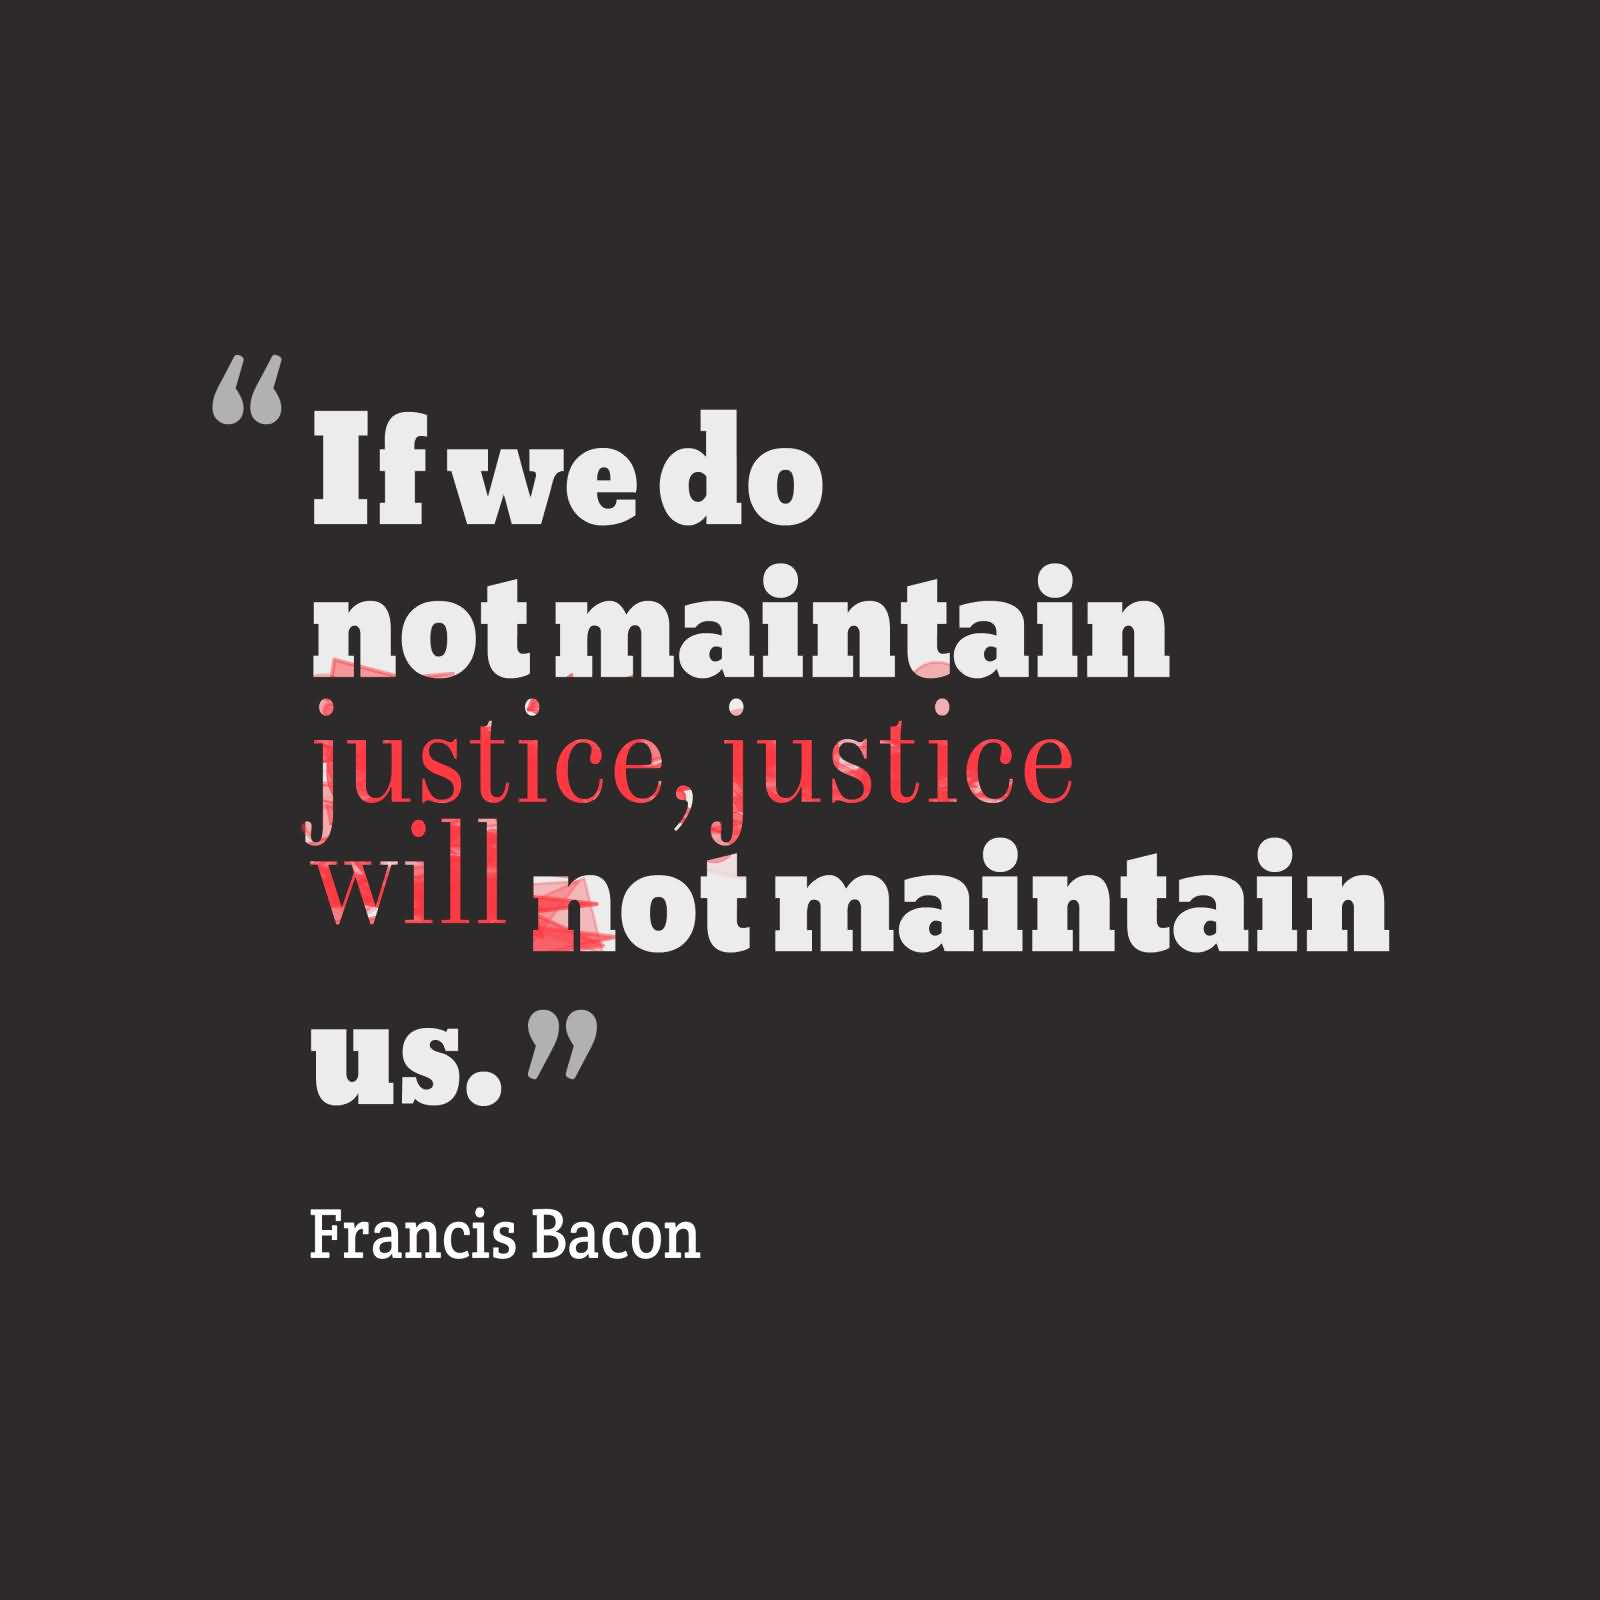 If we do not maintain justice, justice will not maintain us. Francis Bacon